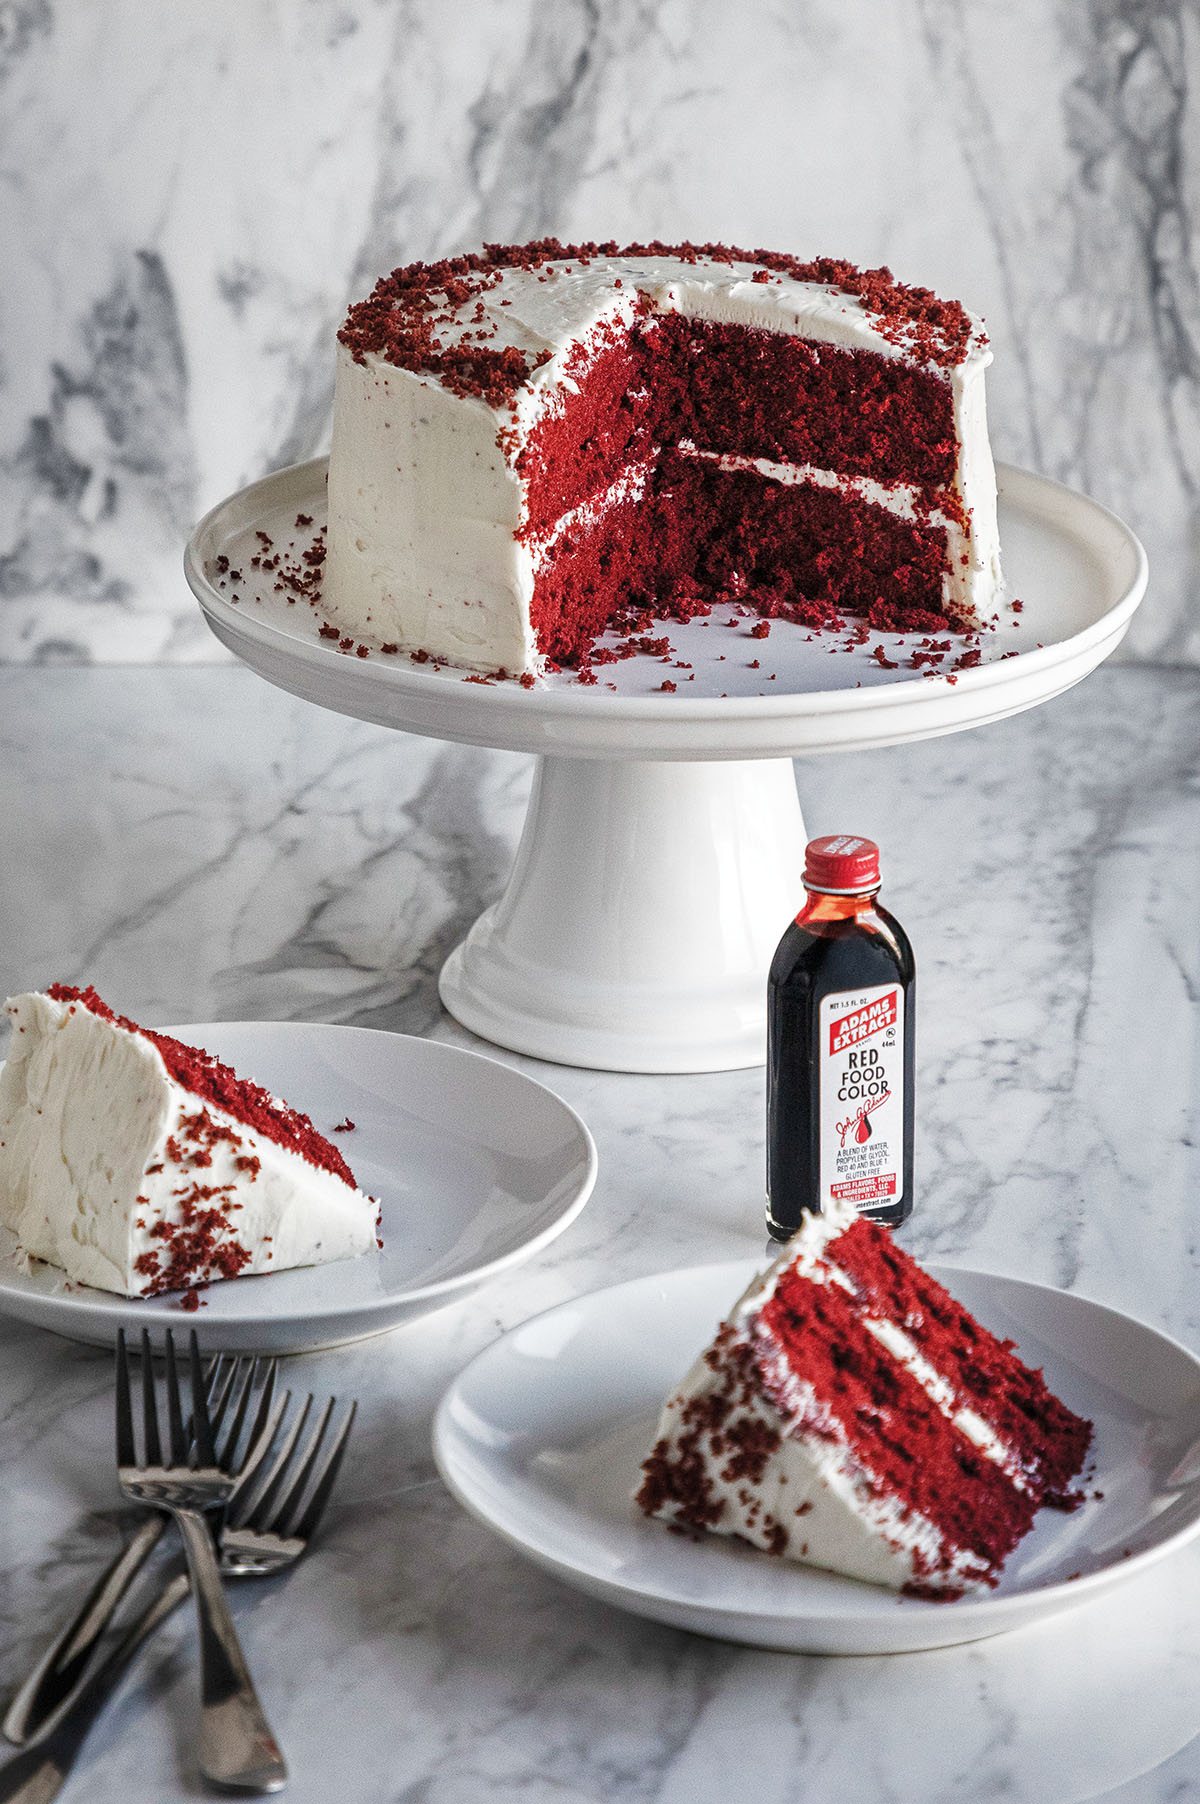 A white-frosted red velvet cake sitting on a white platter next to a bottle of Adam's Extract